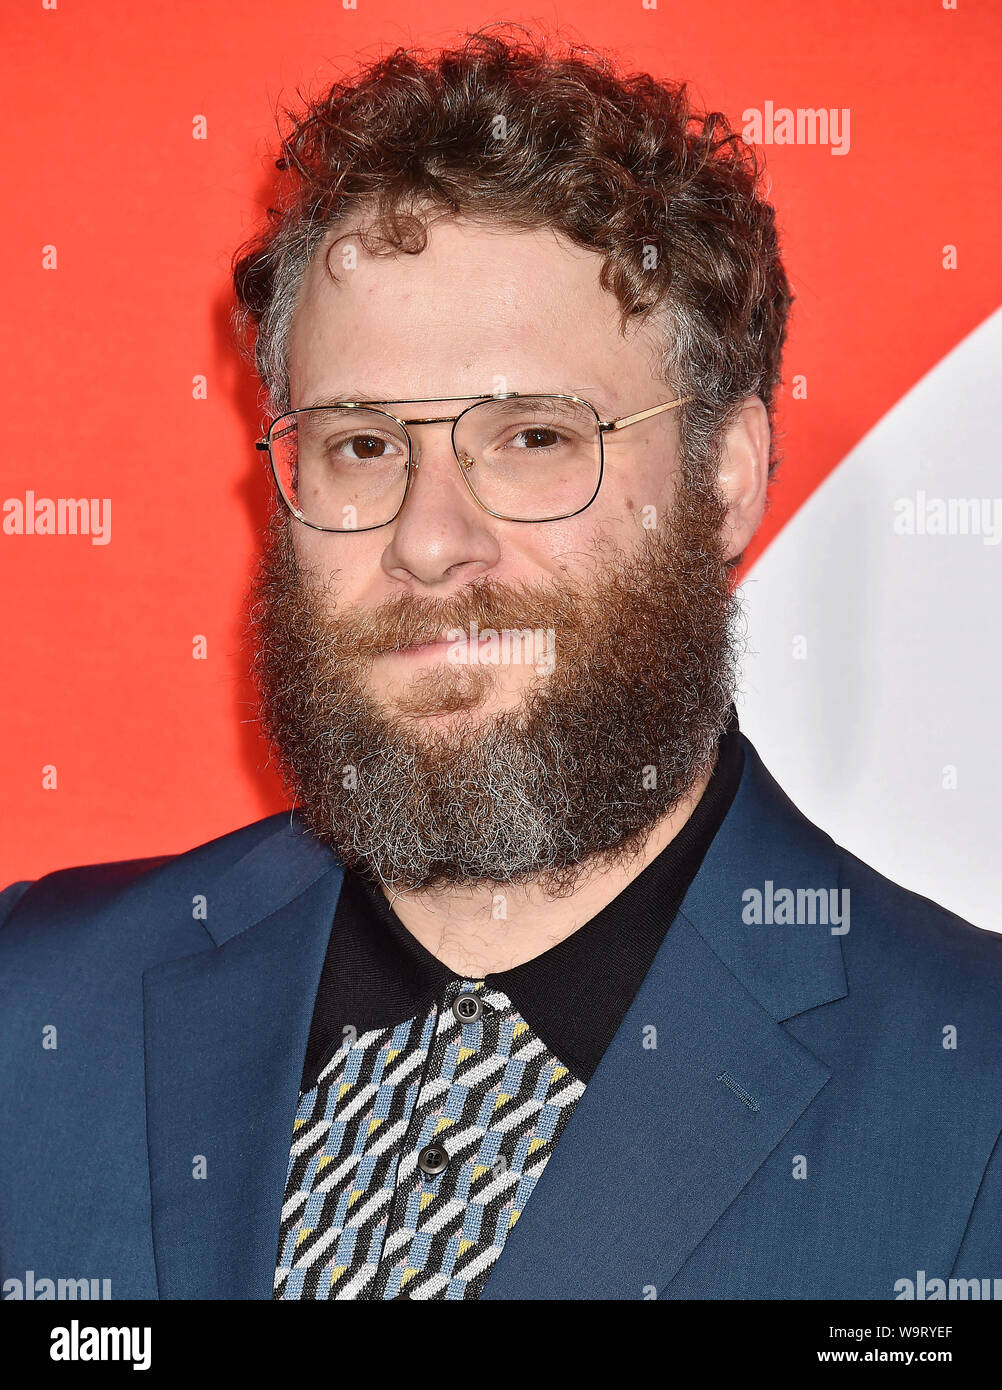 WESTWOOD, CA - AUGUST 14: Seth Rogen attends the Premiere Of Universal Pictures' 'Good Boys' at Regency Village Theatre on August 14, 2019 in Westwood, California. Stock Photo